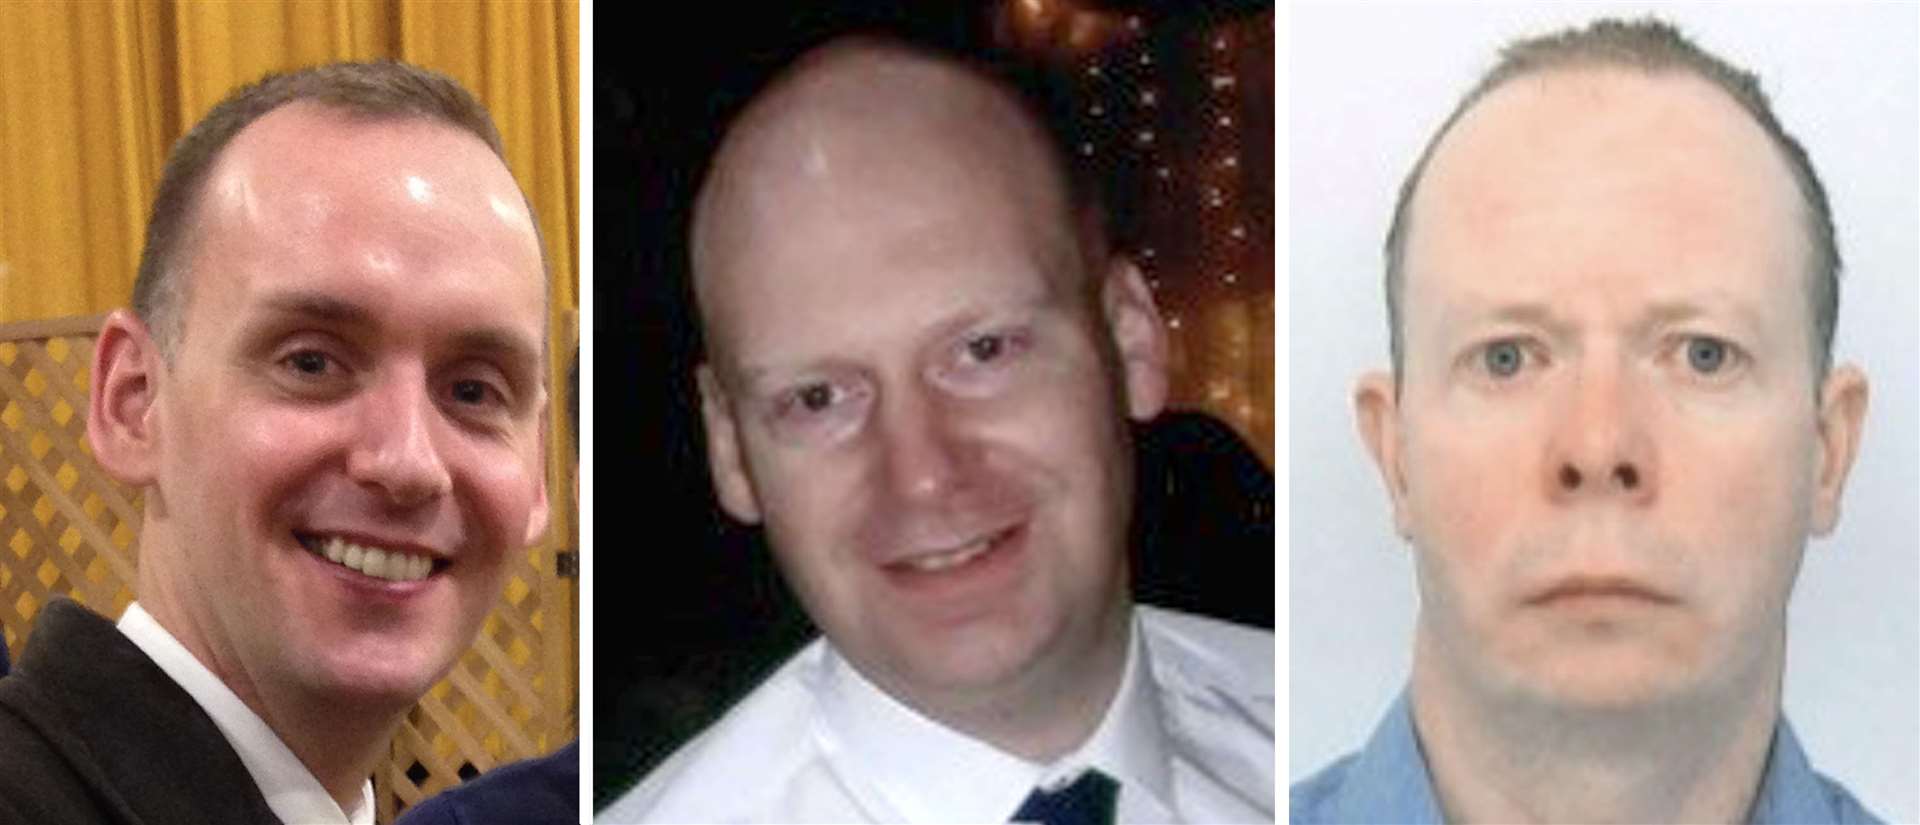 James Furlong, David Wails and Joseph Ritchie-Bennett were killed in the Reading terror attacks (Thames Valley Police/PA)